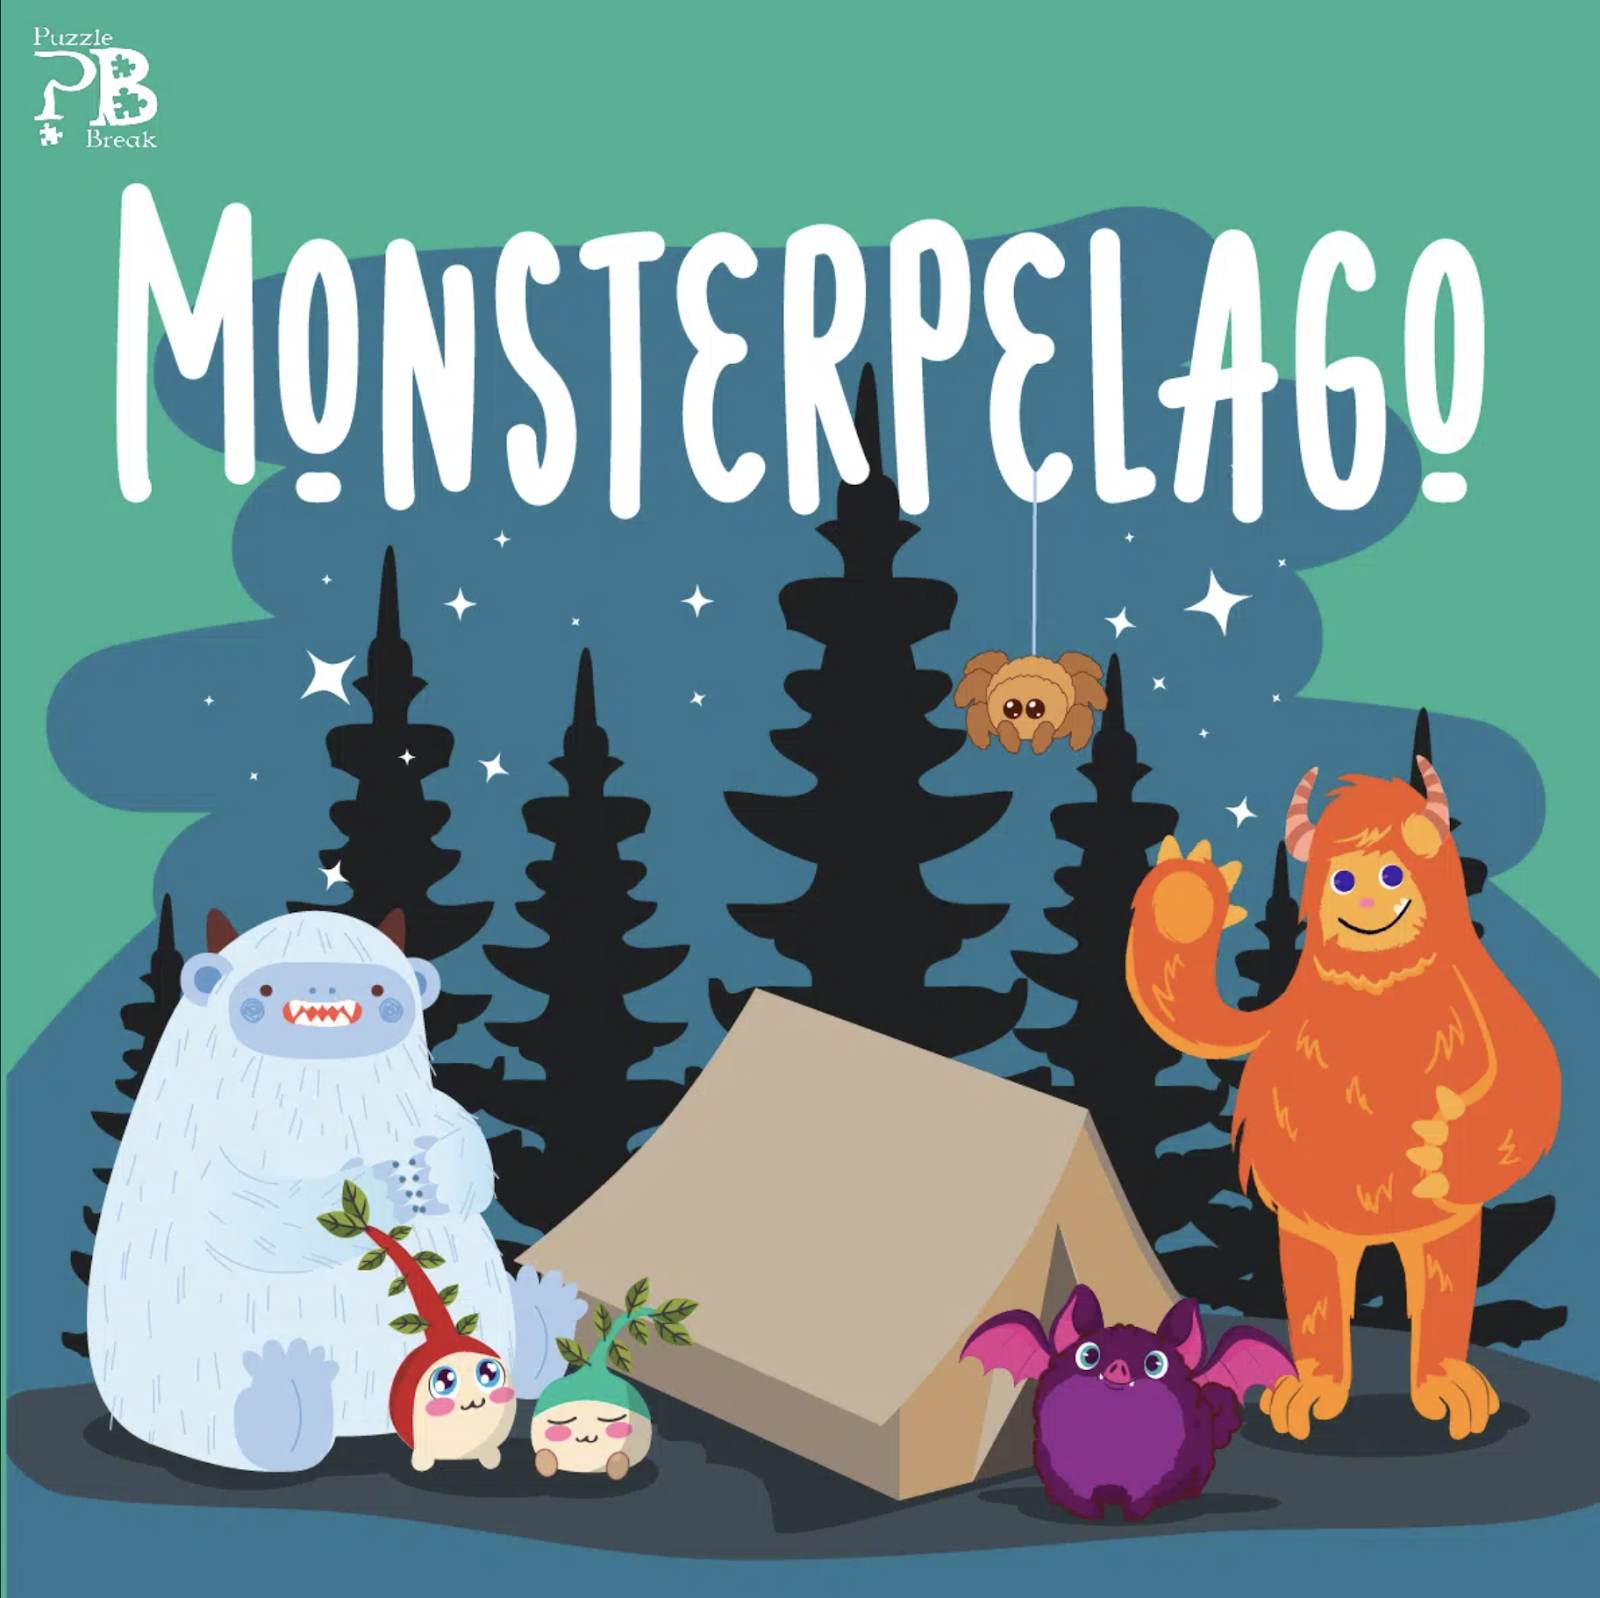 Monsterpelago by Puzzle Break Graphic with Monsters Smiling